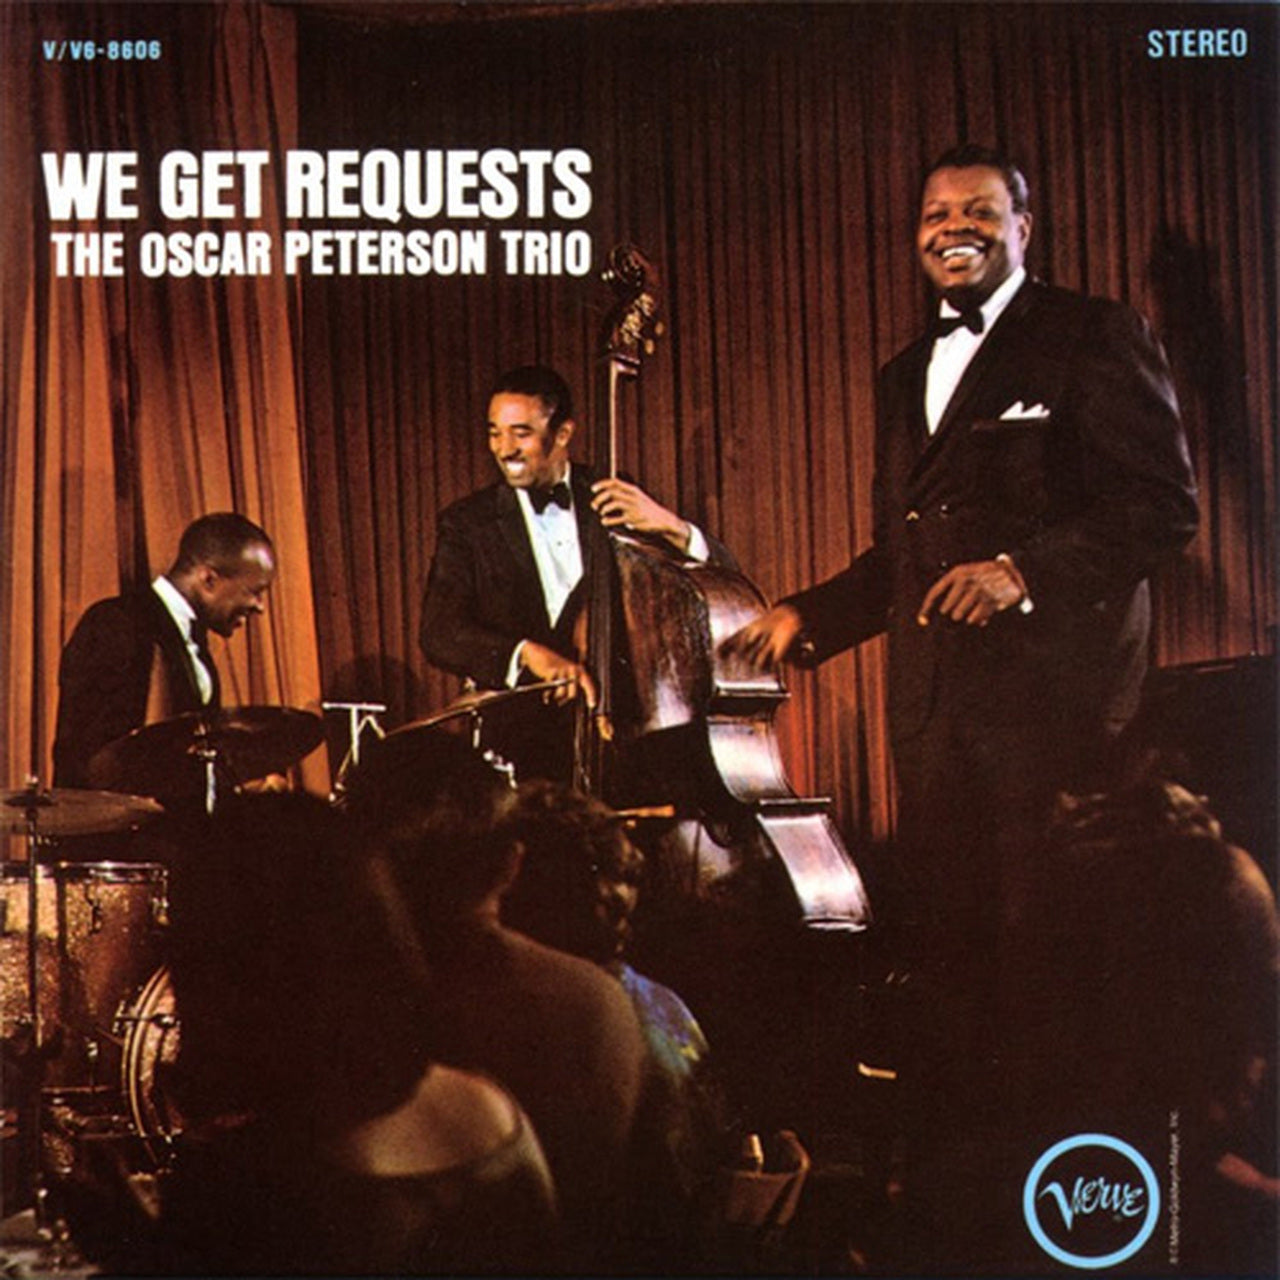 The Oscar Peterson Trio | We Get Requests [SACD]